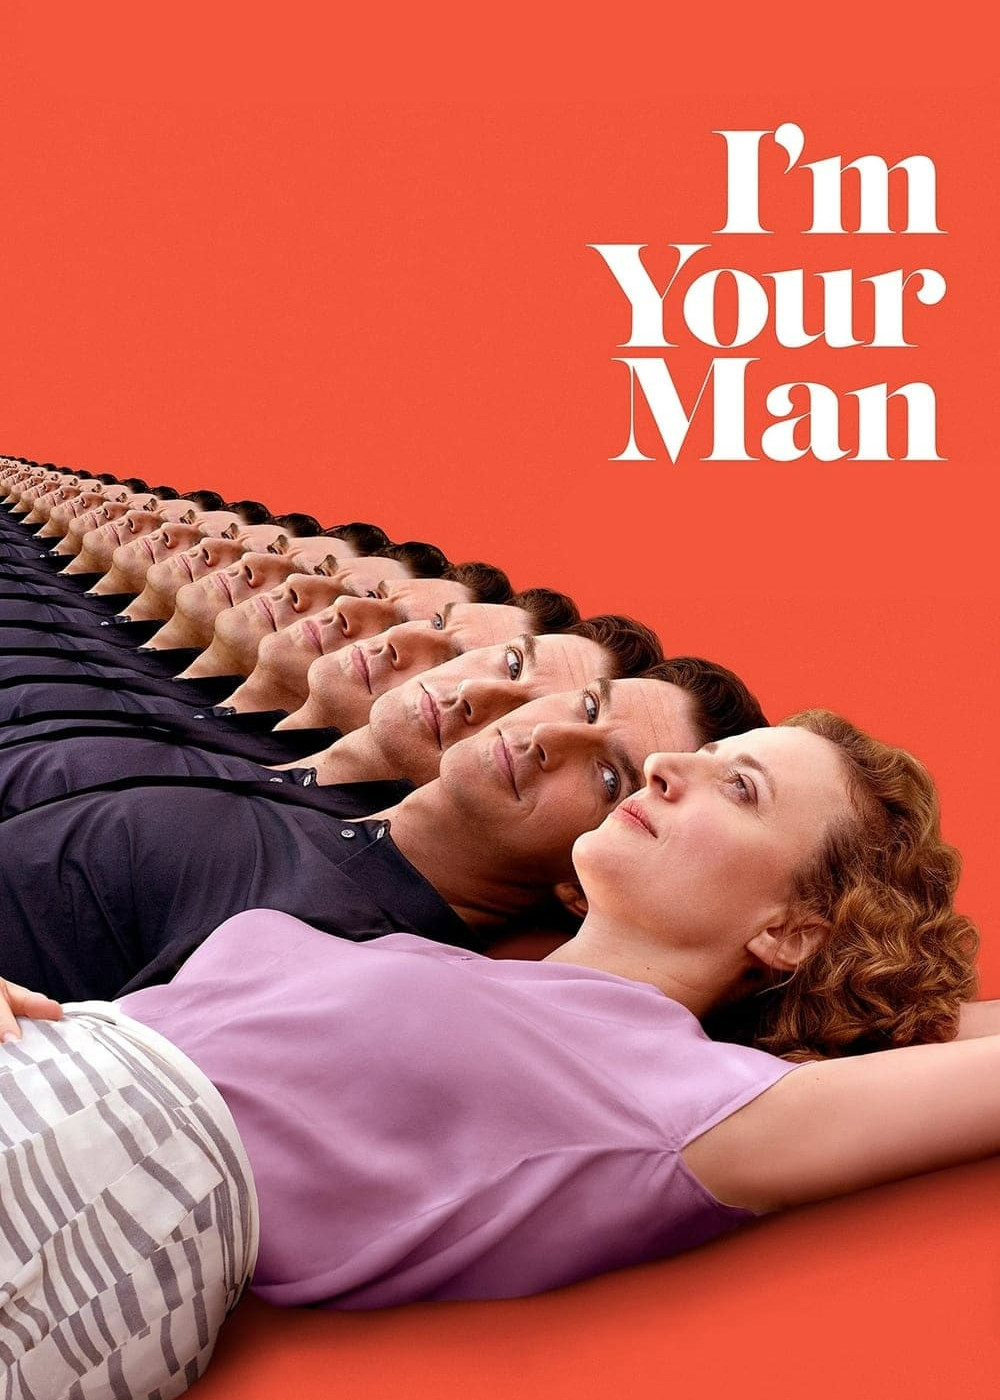 I'm Your Man - I'm Your Man